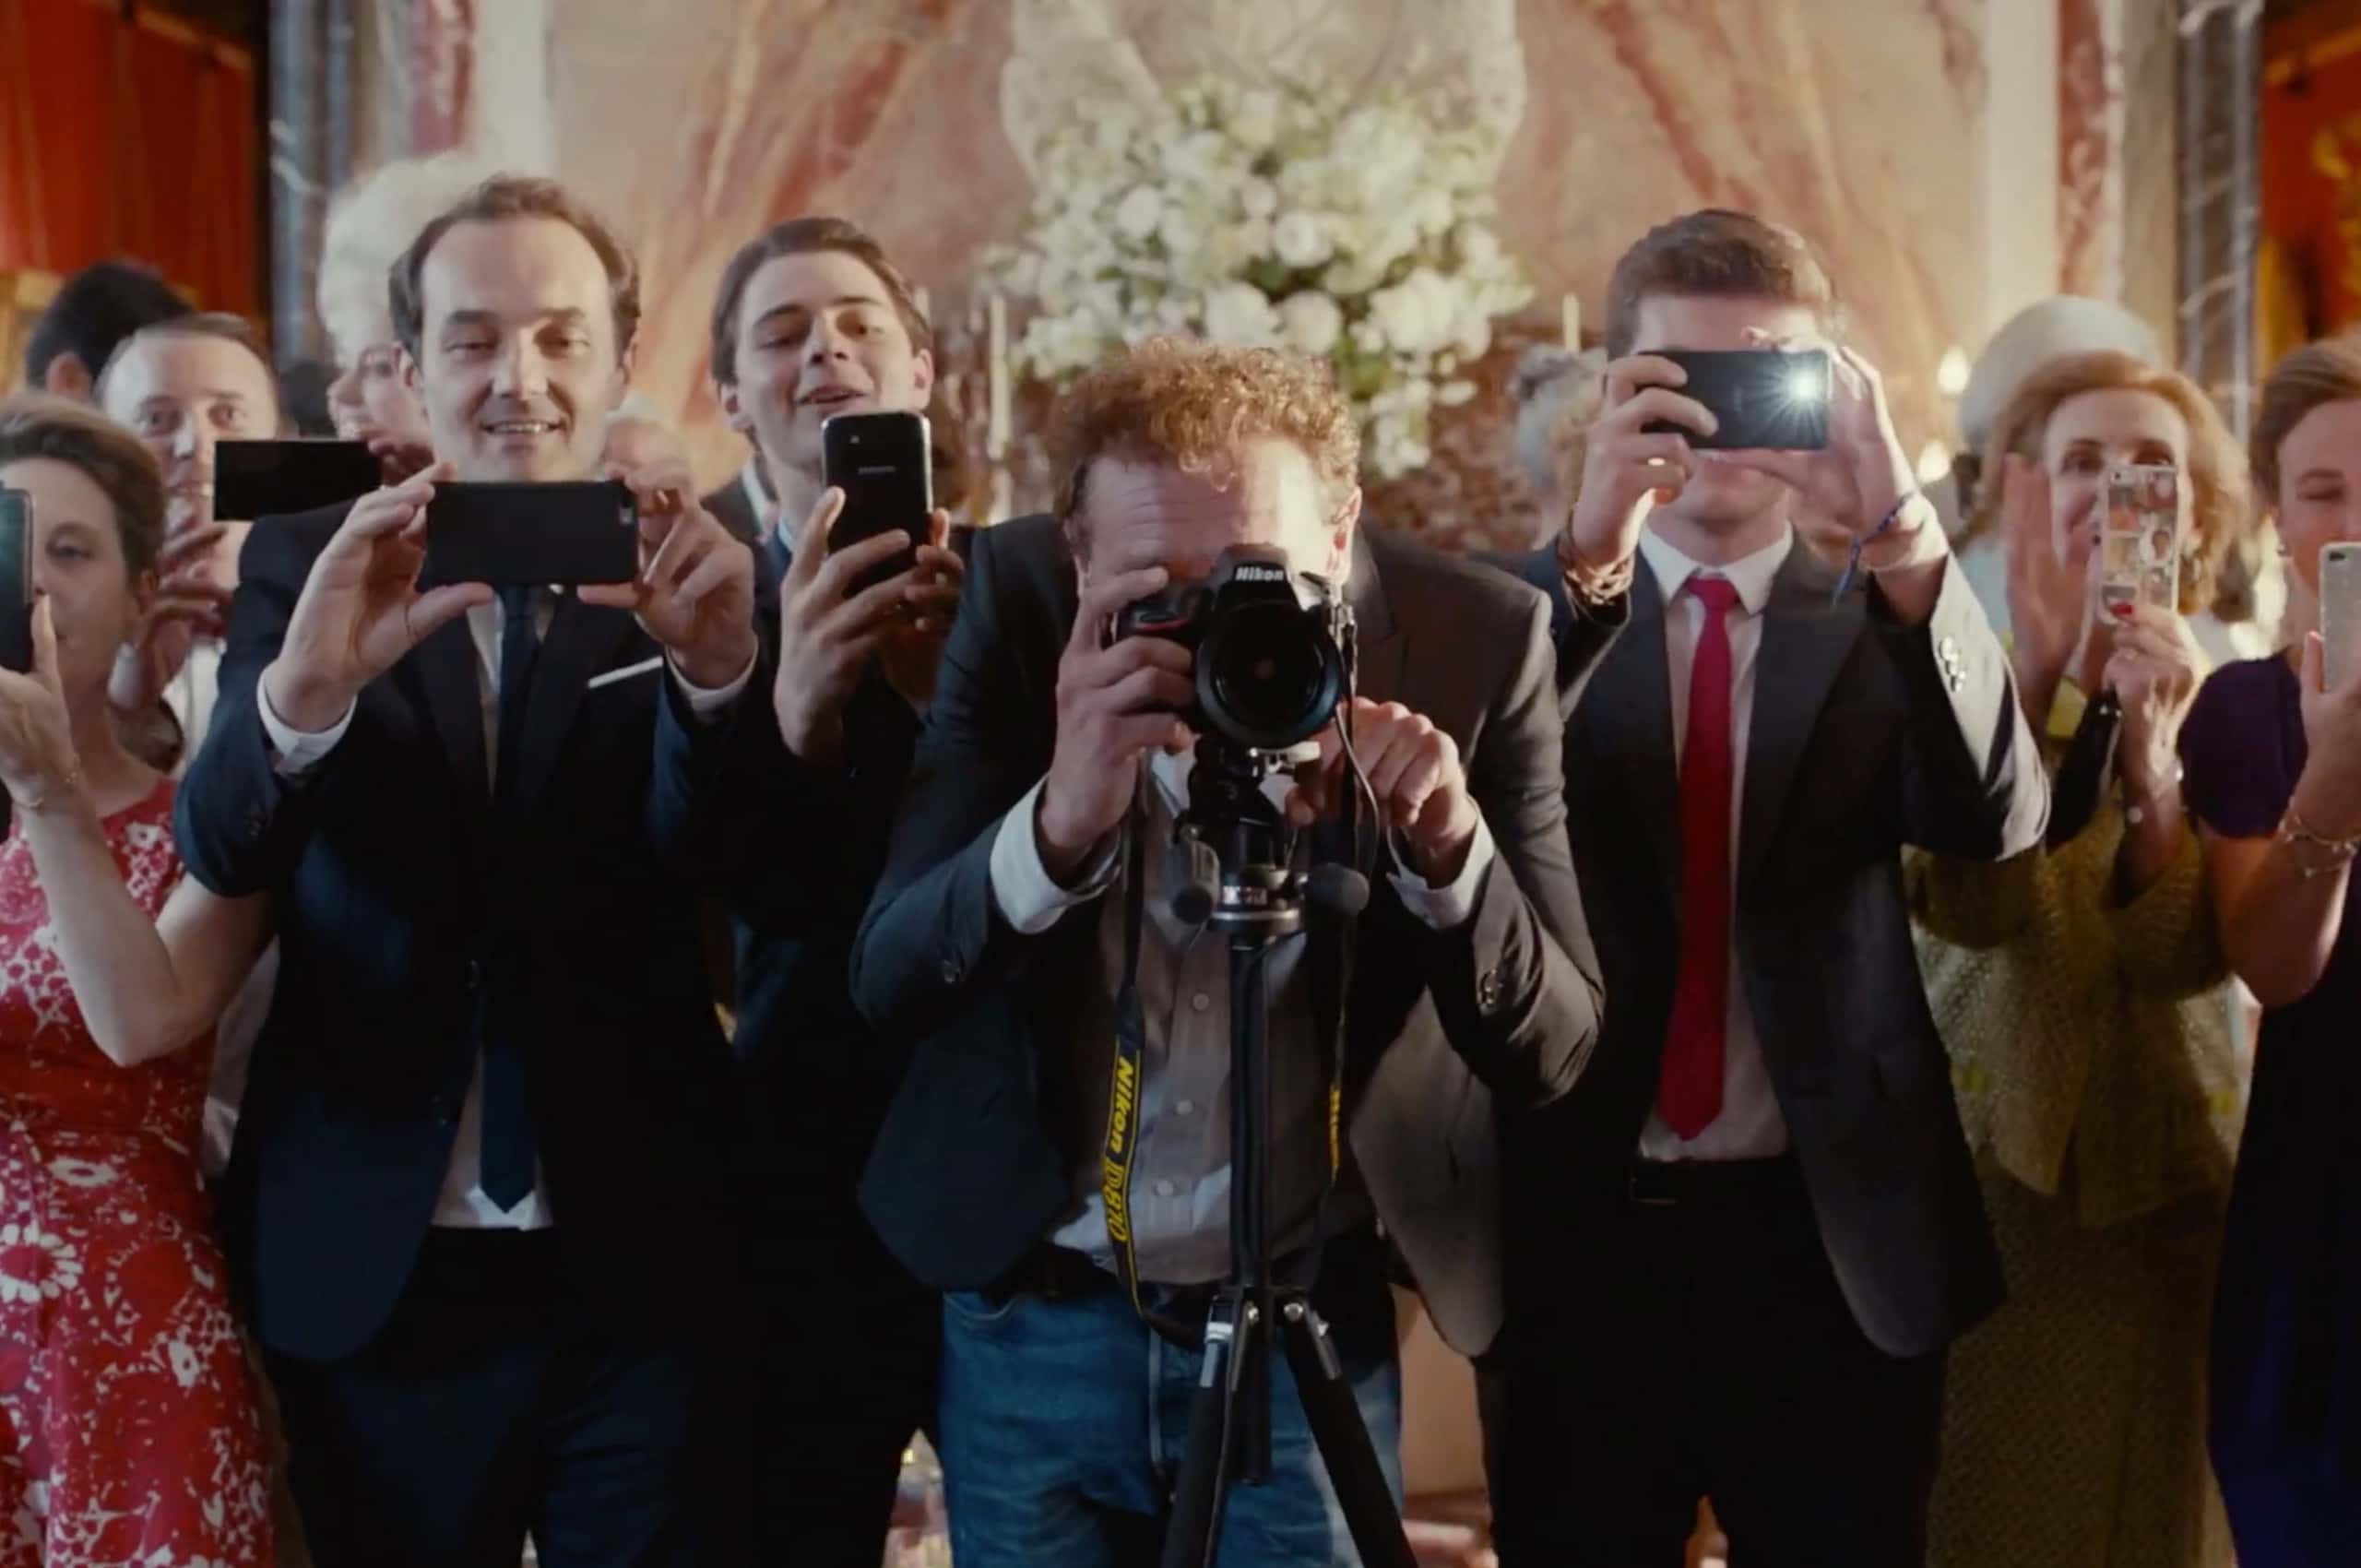 How many photographers for wedding